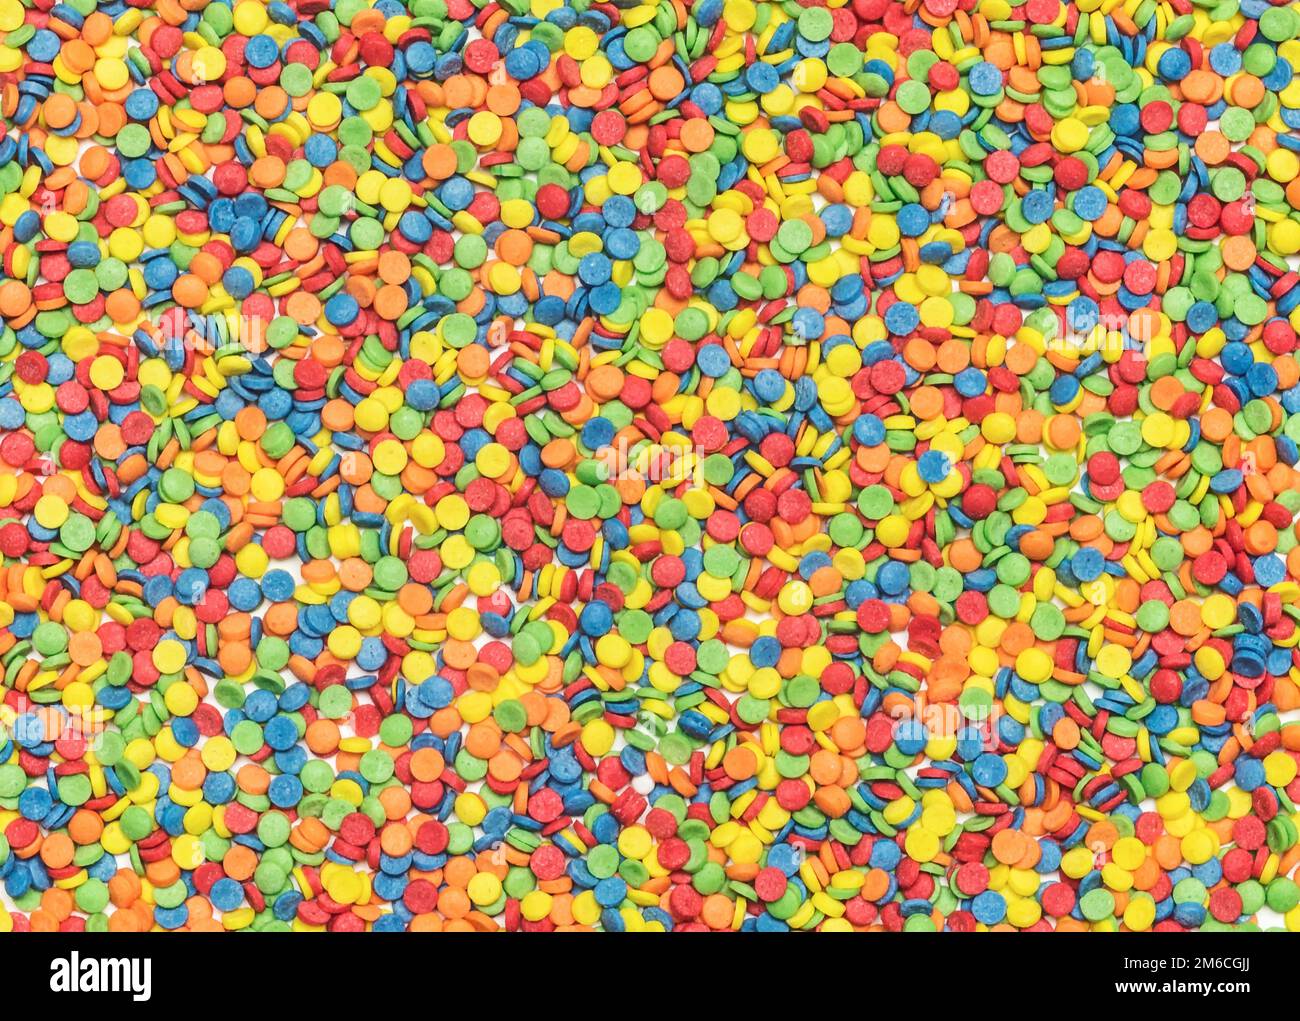 Background, texture. Colored confectionery, decorative topping over the entire surface of the frame Stock Photo